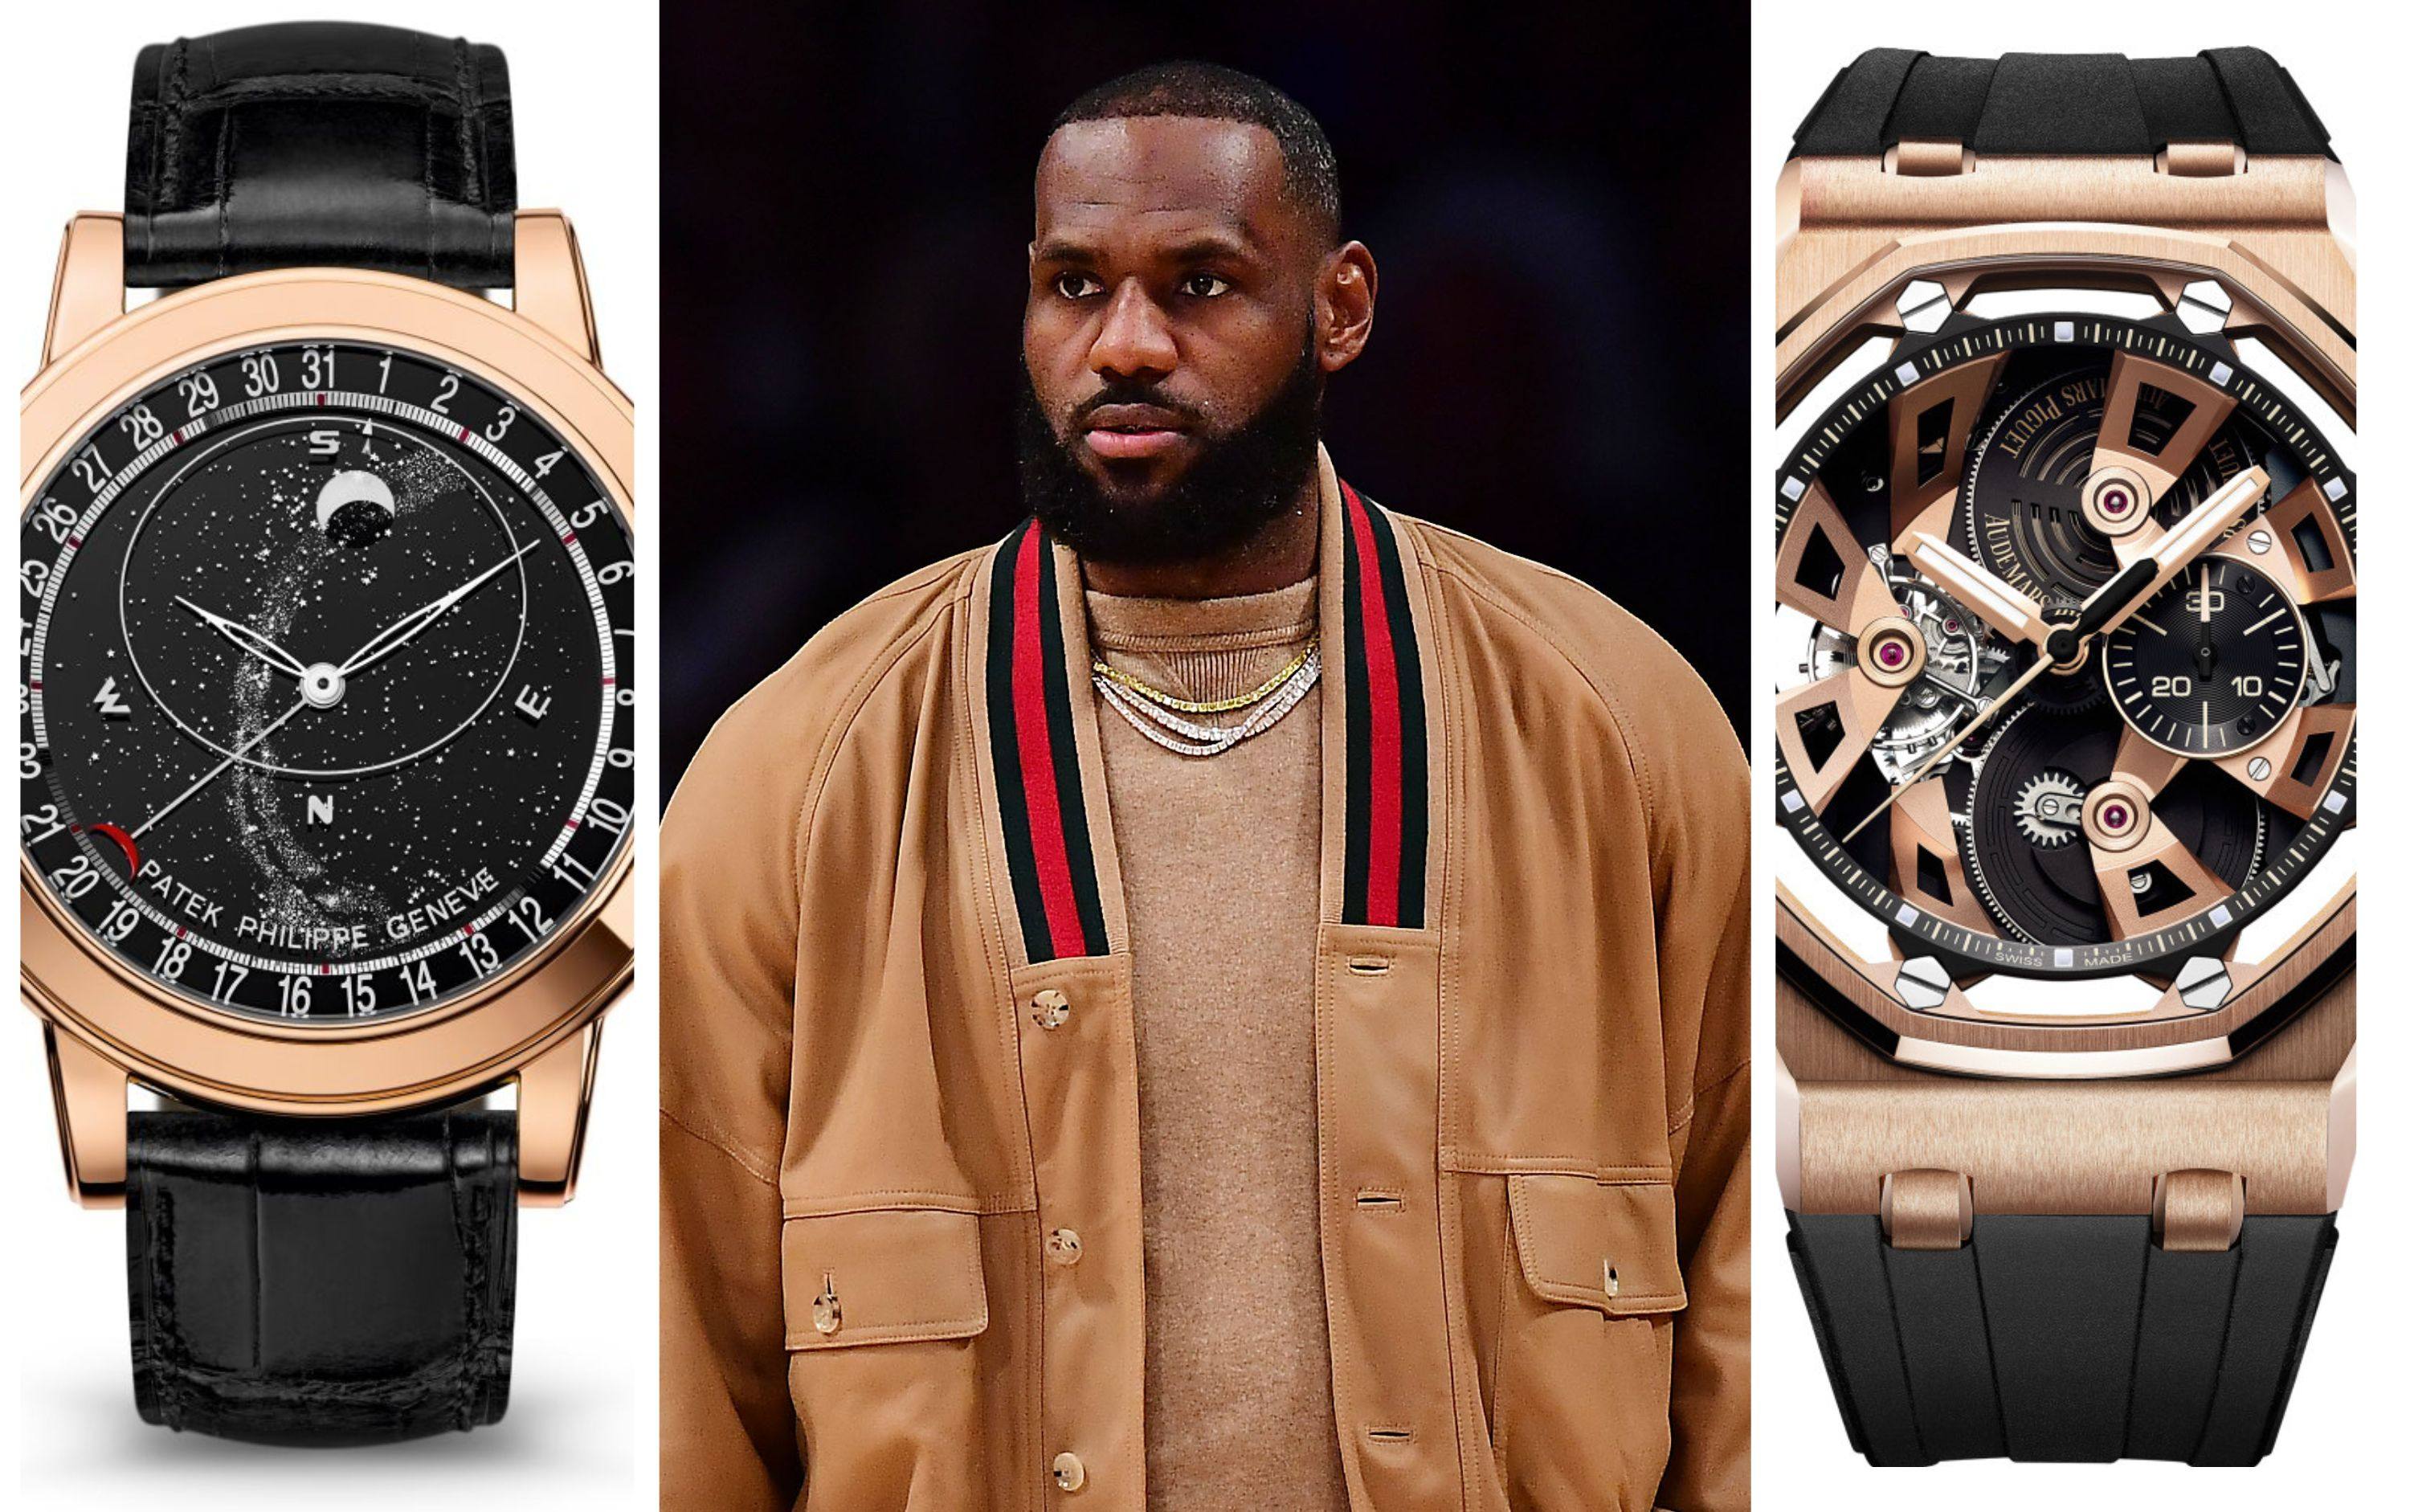 Los Angeles Lakers forward LeBron James boasts an impressive watch collection, from Audemars Piguet to Patek Philippe. Photos: Audemars Piguet, USA Today Sports, Patek Philippe